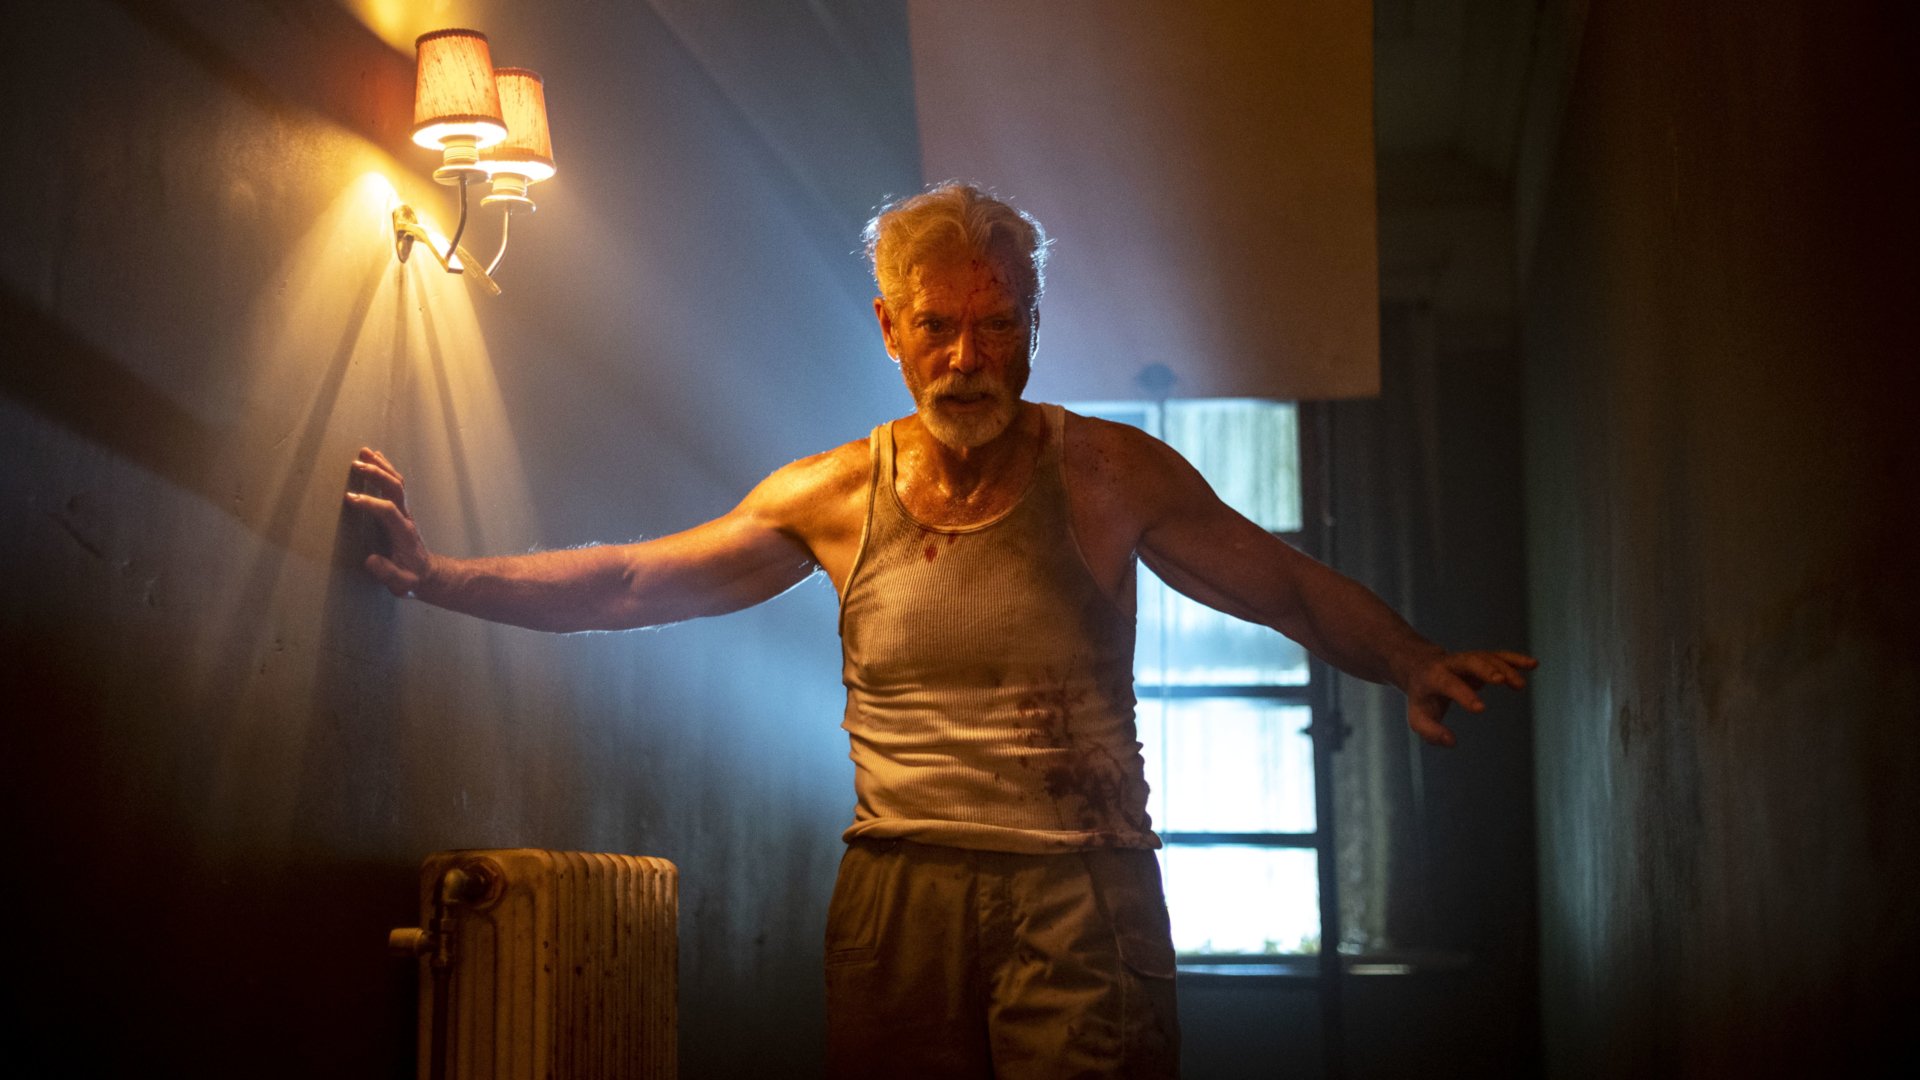 Don'T Breathe 2021 Wallpapers